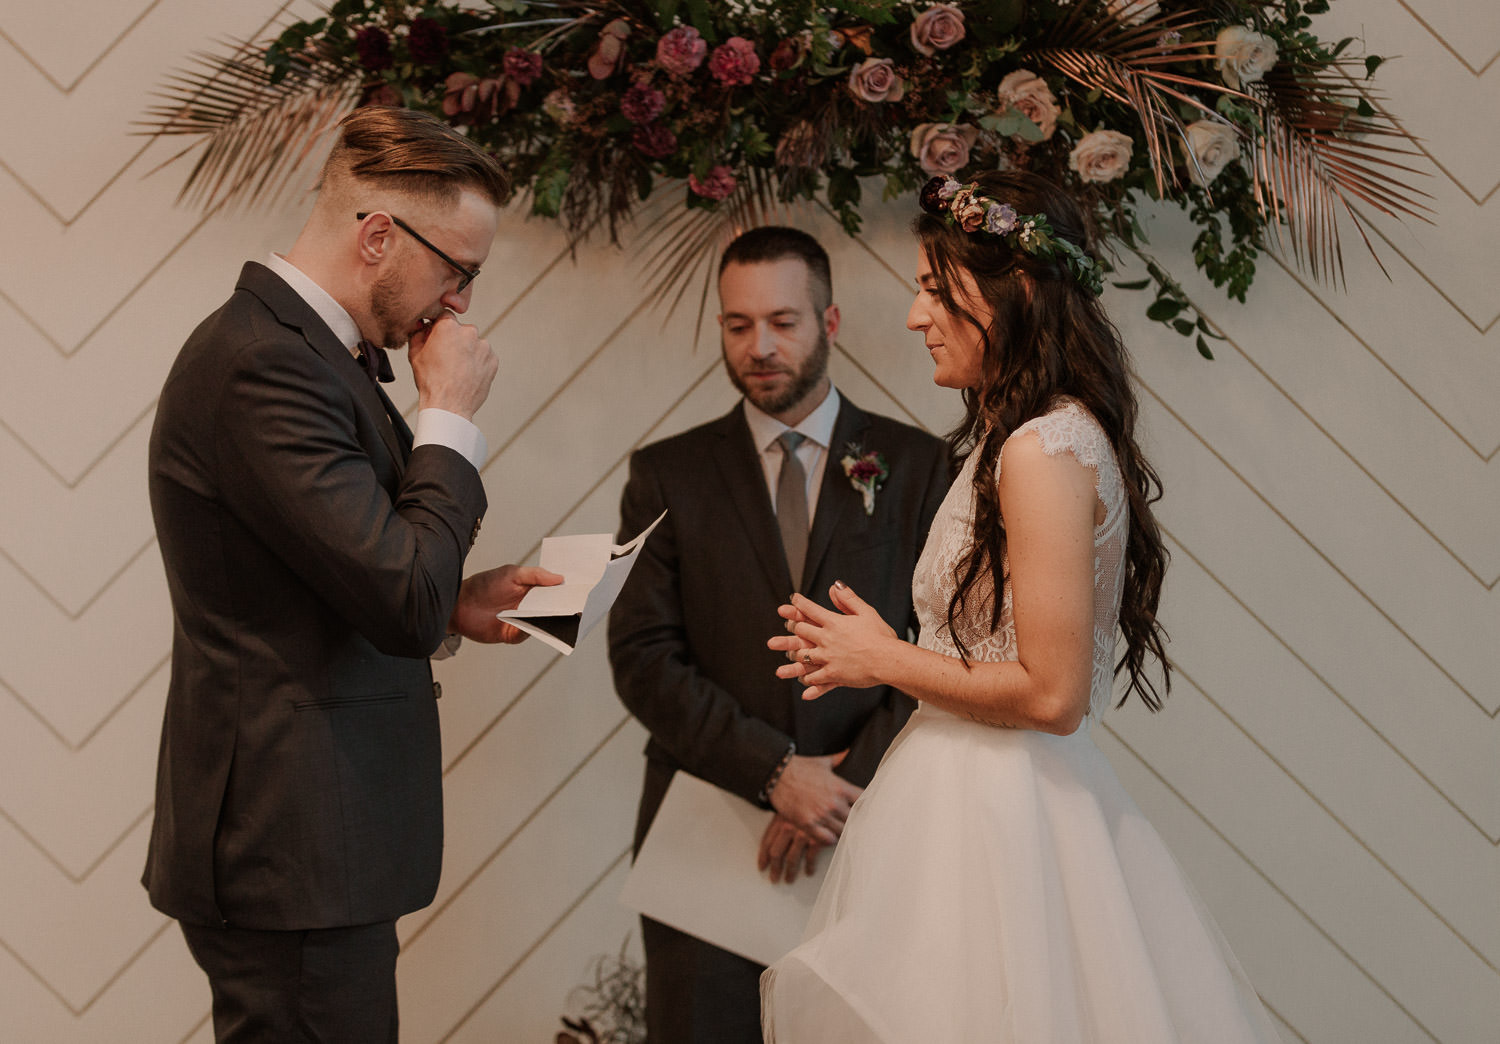 Writing your own vows for your elopement can be hard. Bride and groom share their vows during the ceremony. Groom holds back tears as he reads his vows